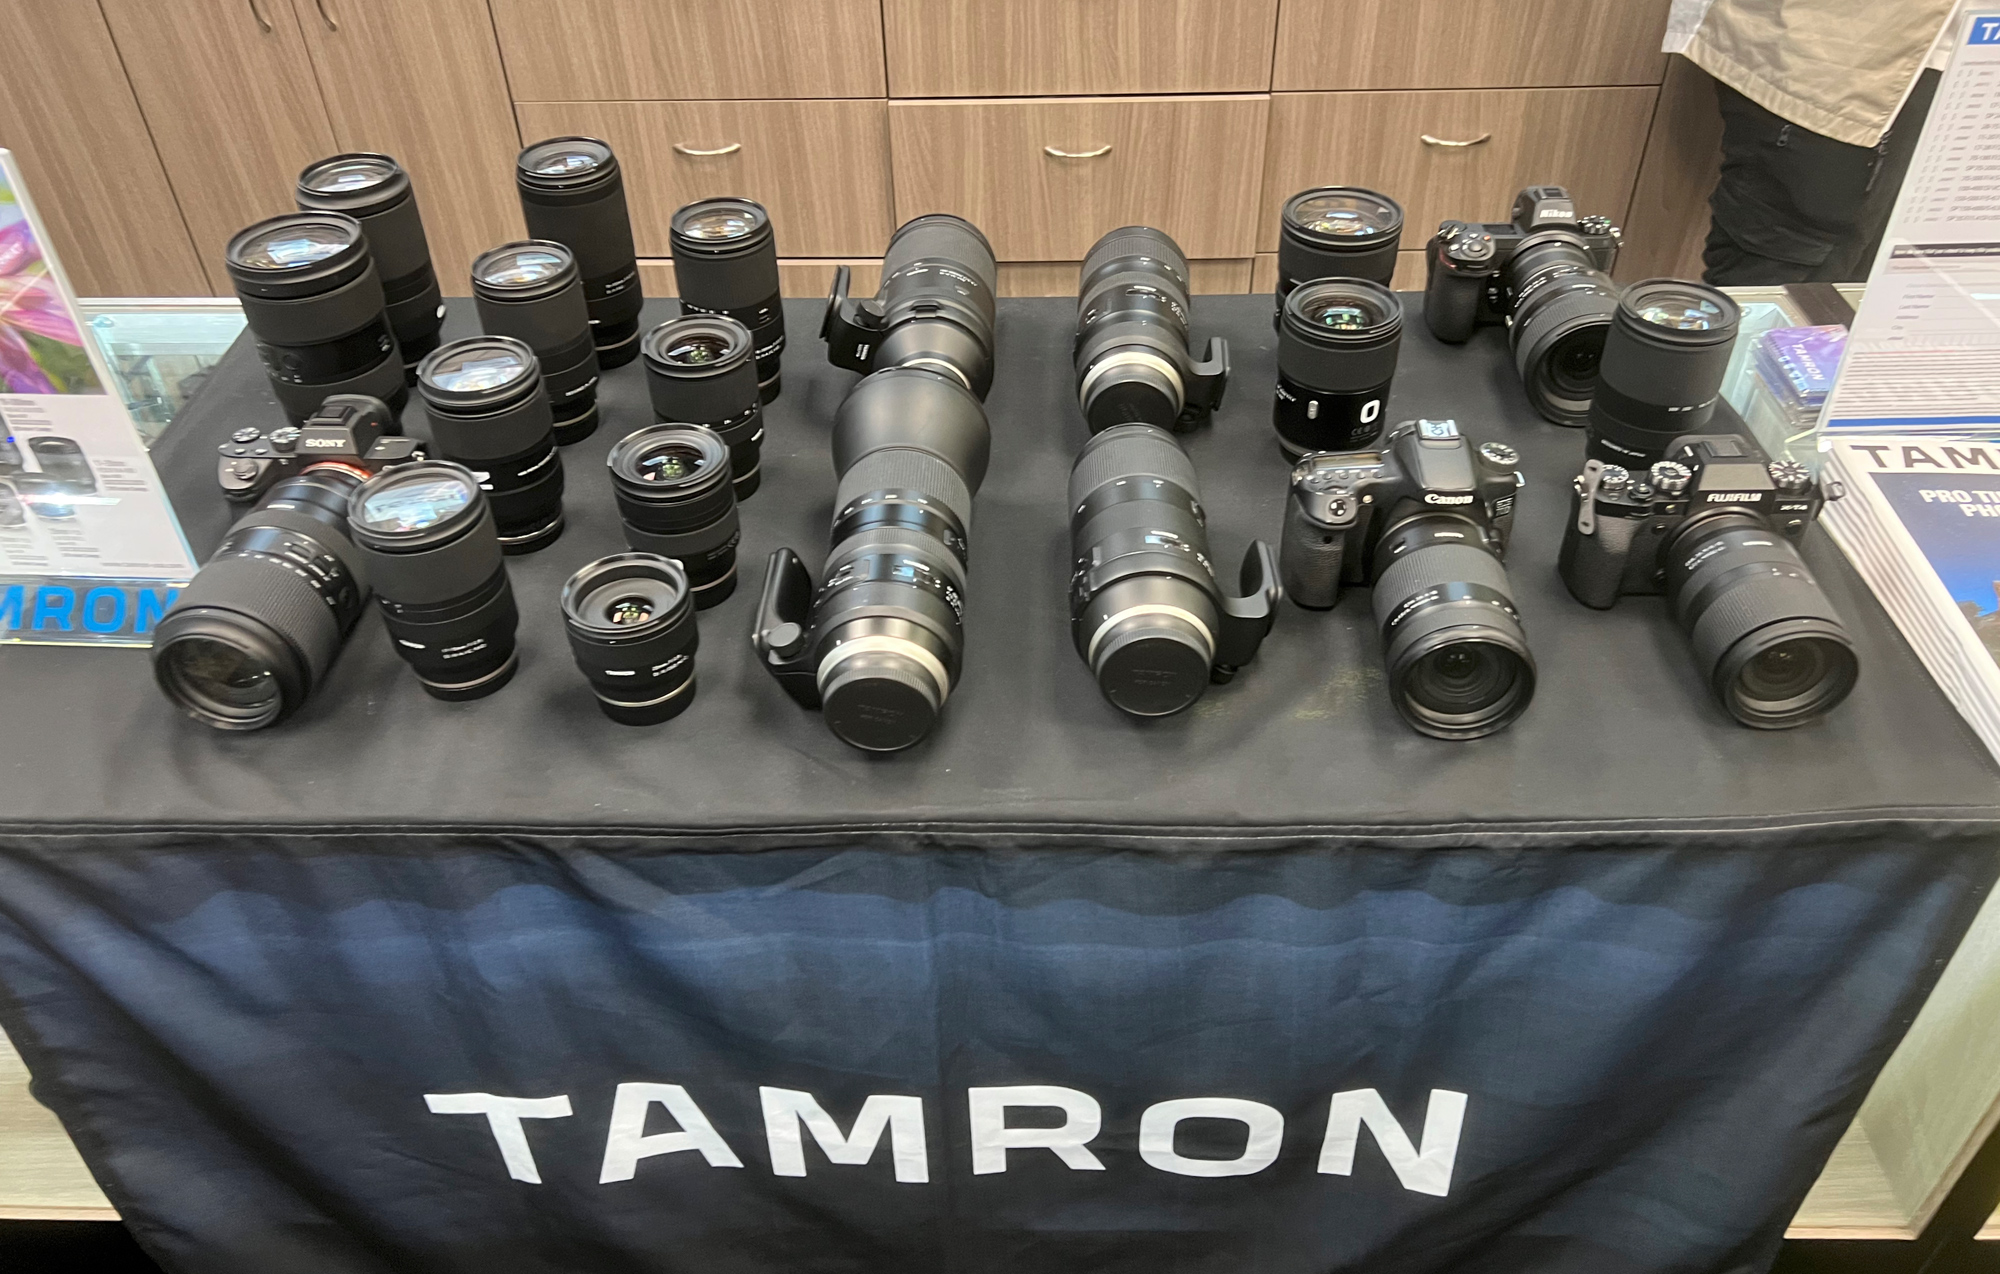 Tamron has certainly received a lot of notoriety with their lenses and you can see just a few of them here